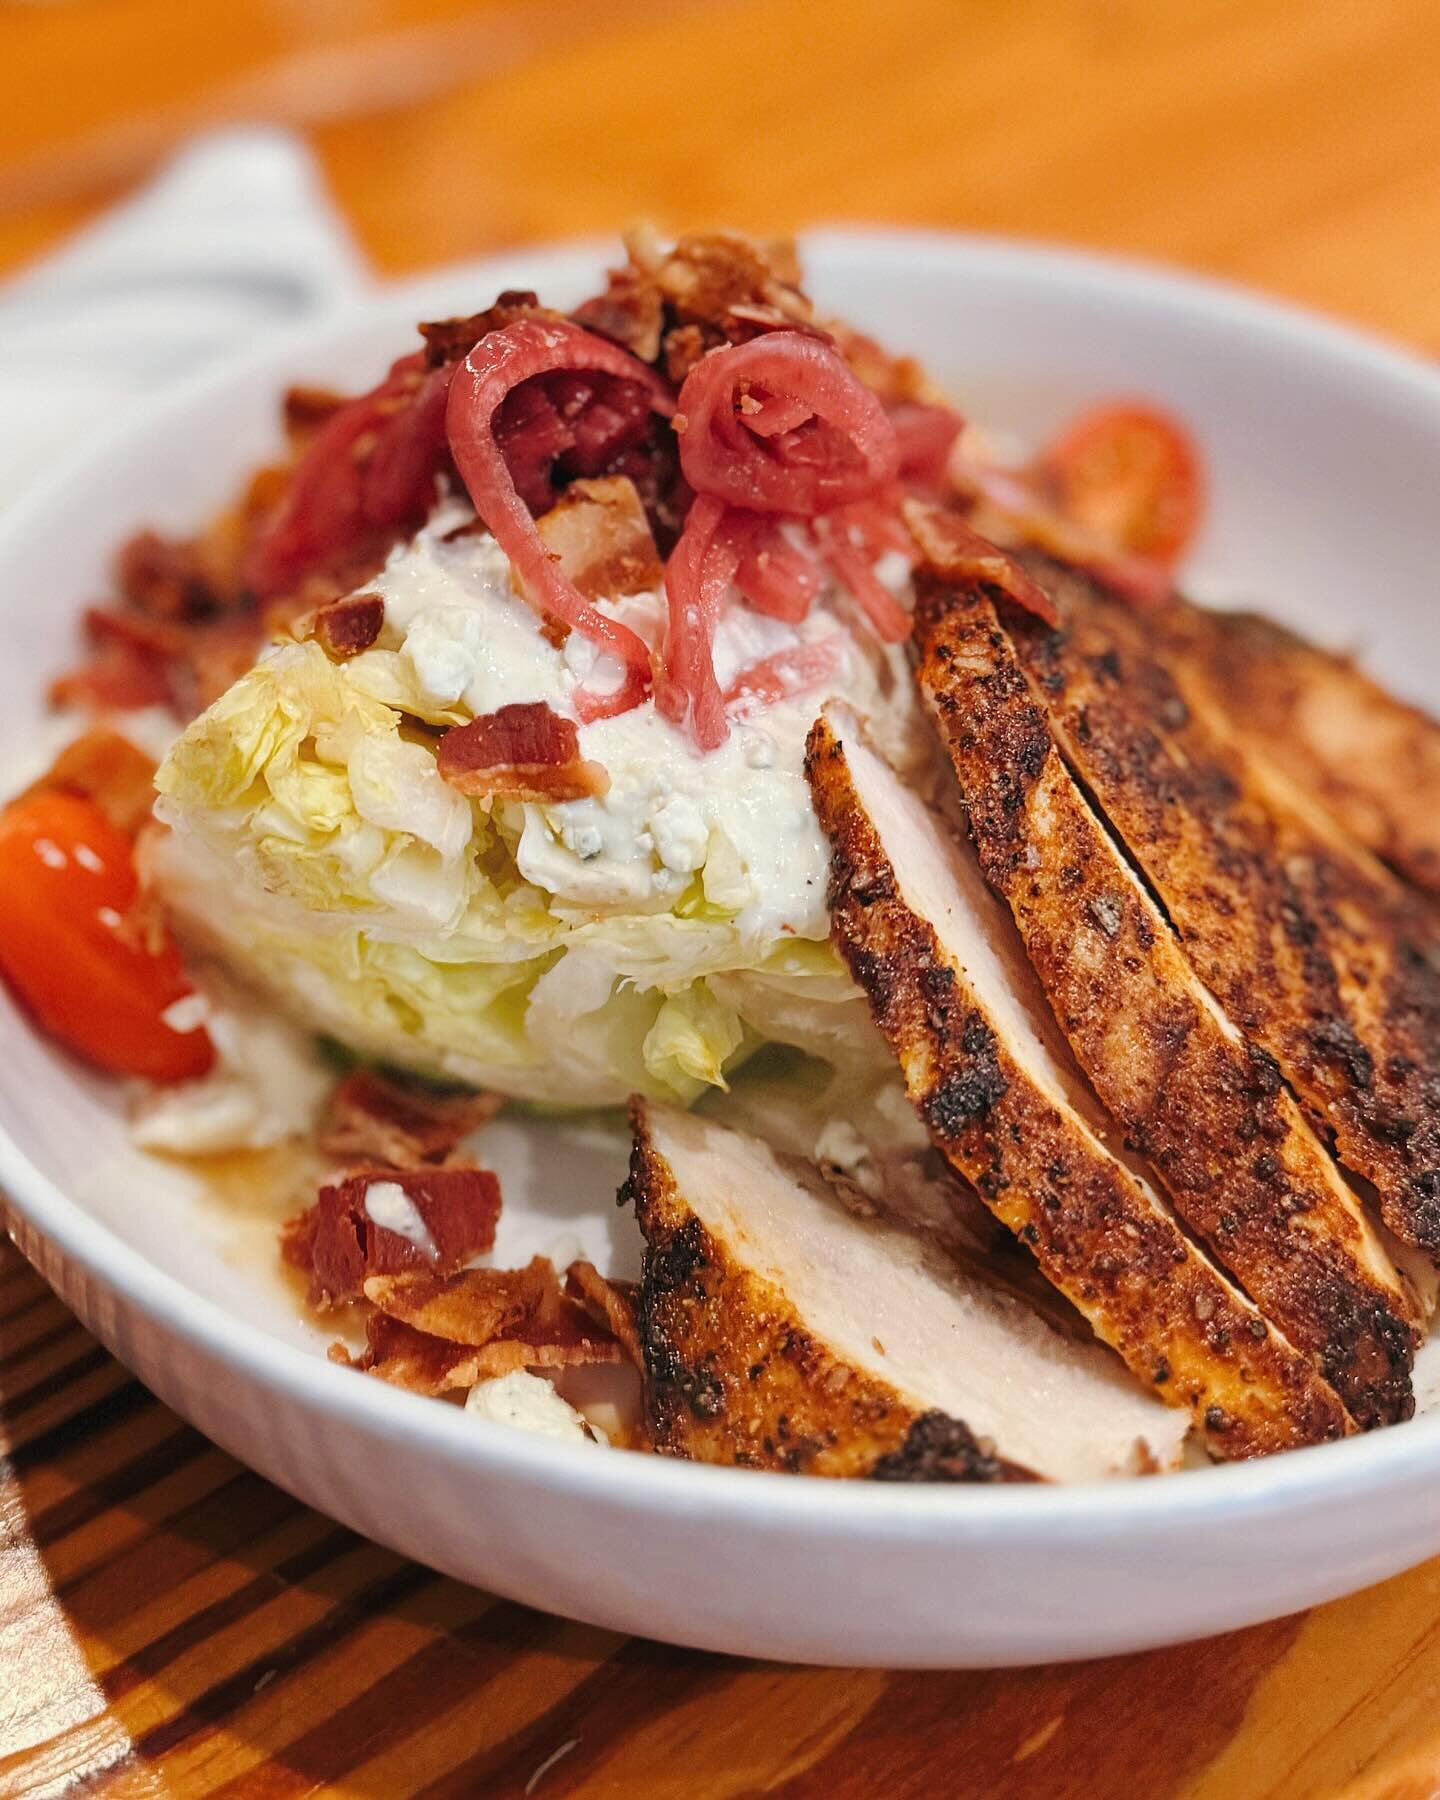 Enjoy a Wedge Salad with Blackened Chicken! &bull; Iceberg Lettuce with Housemade Blue Cheese Dressing, Pecan-Smoked Bacon, Blue Cheese Crumbles, Pickled Onions &amp; Cherry Tomatoes! 🍽️ Open 11AM to 9PM